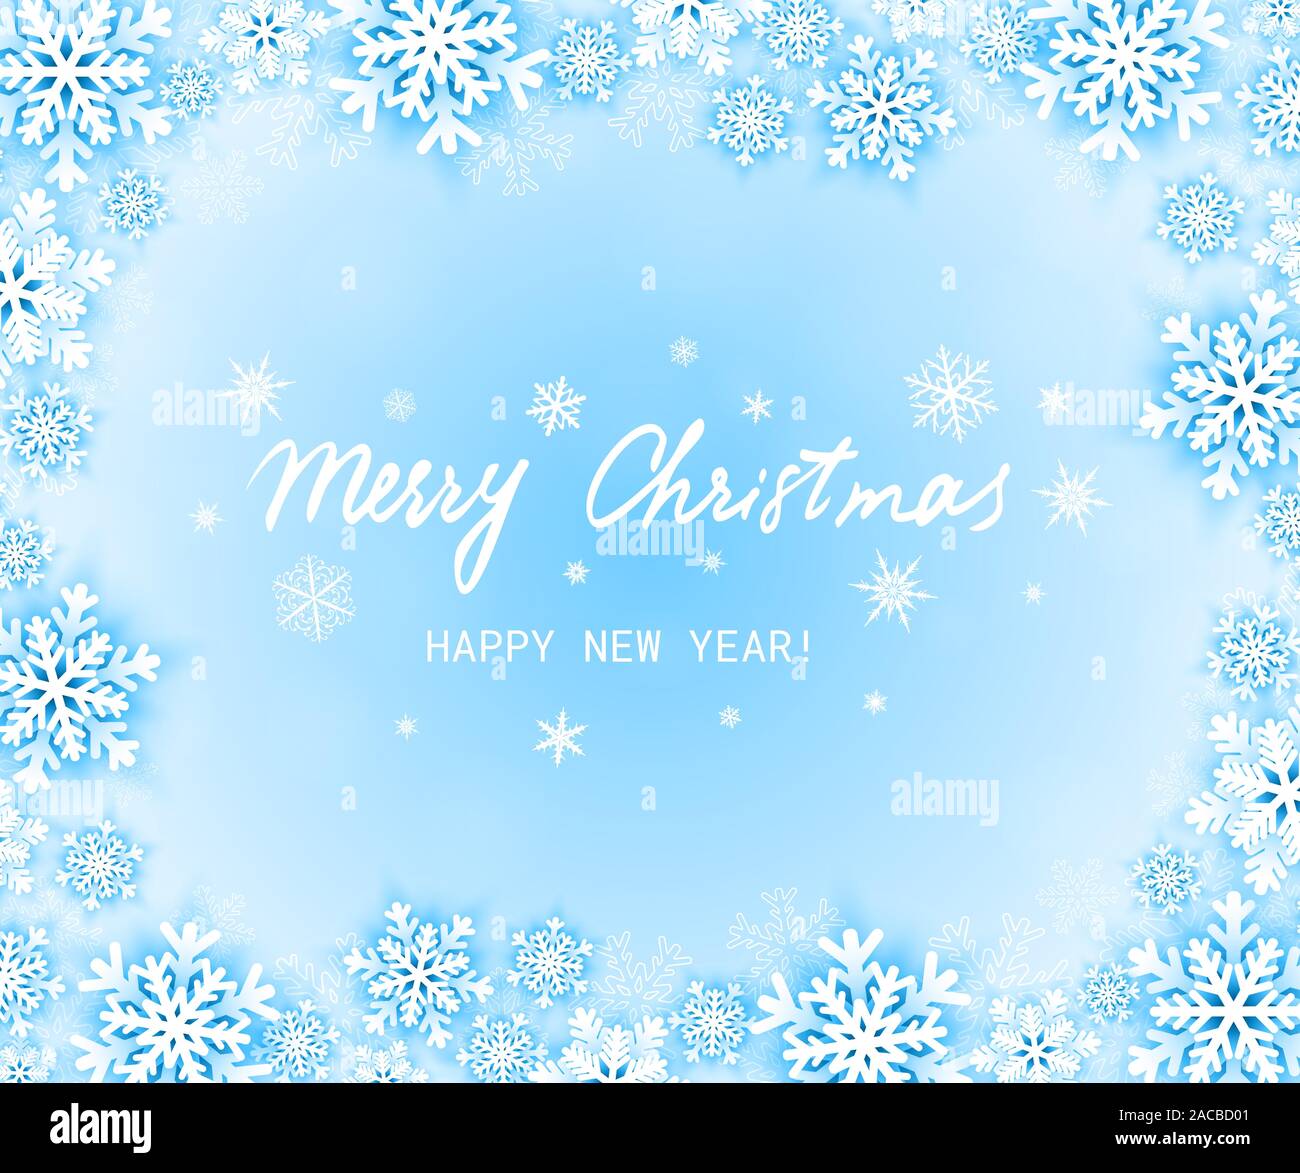 Merry Christmas and Happy New Year greeting card with paper snowflakes on blue background. Vector illustration Stock Vector